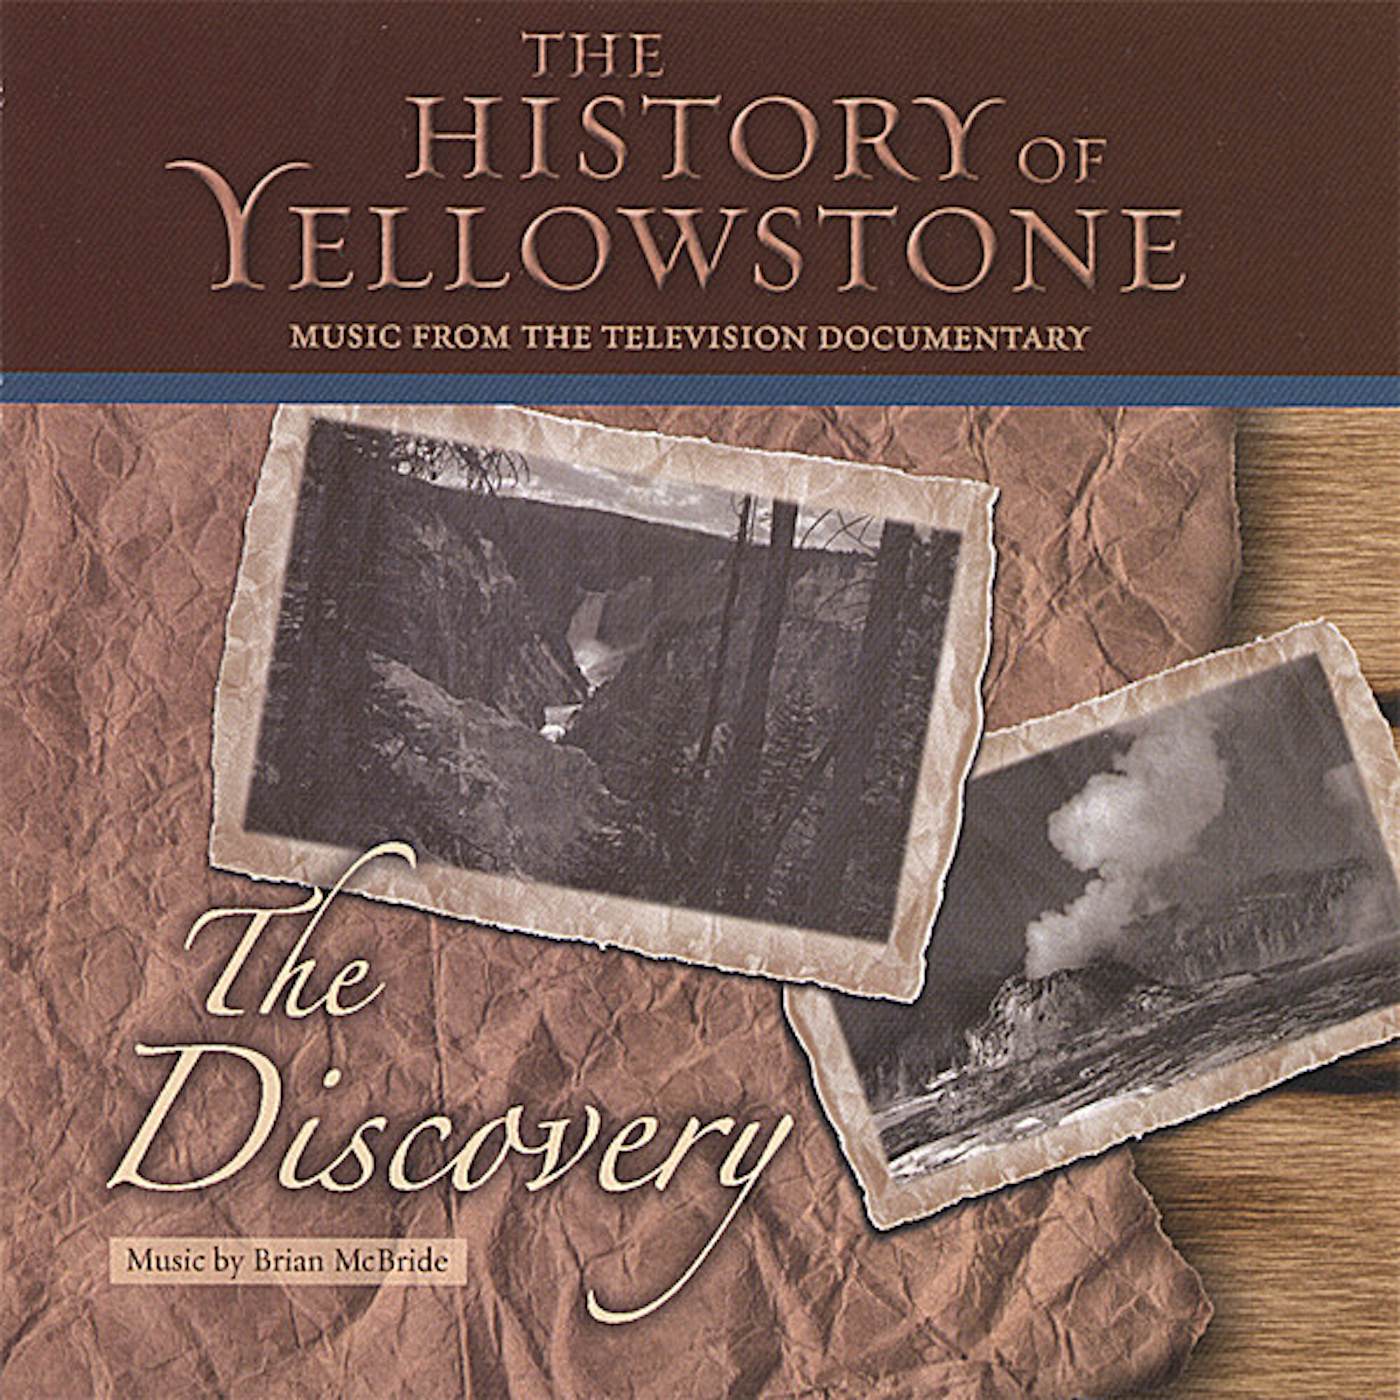 Brian McBride HISTORY OF YELLOWSTONE-DISCOVERY CD